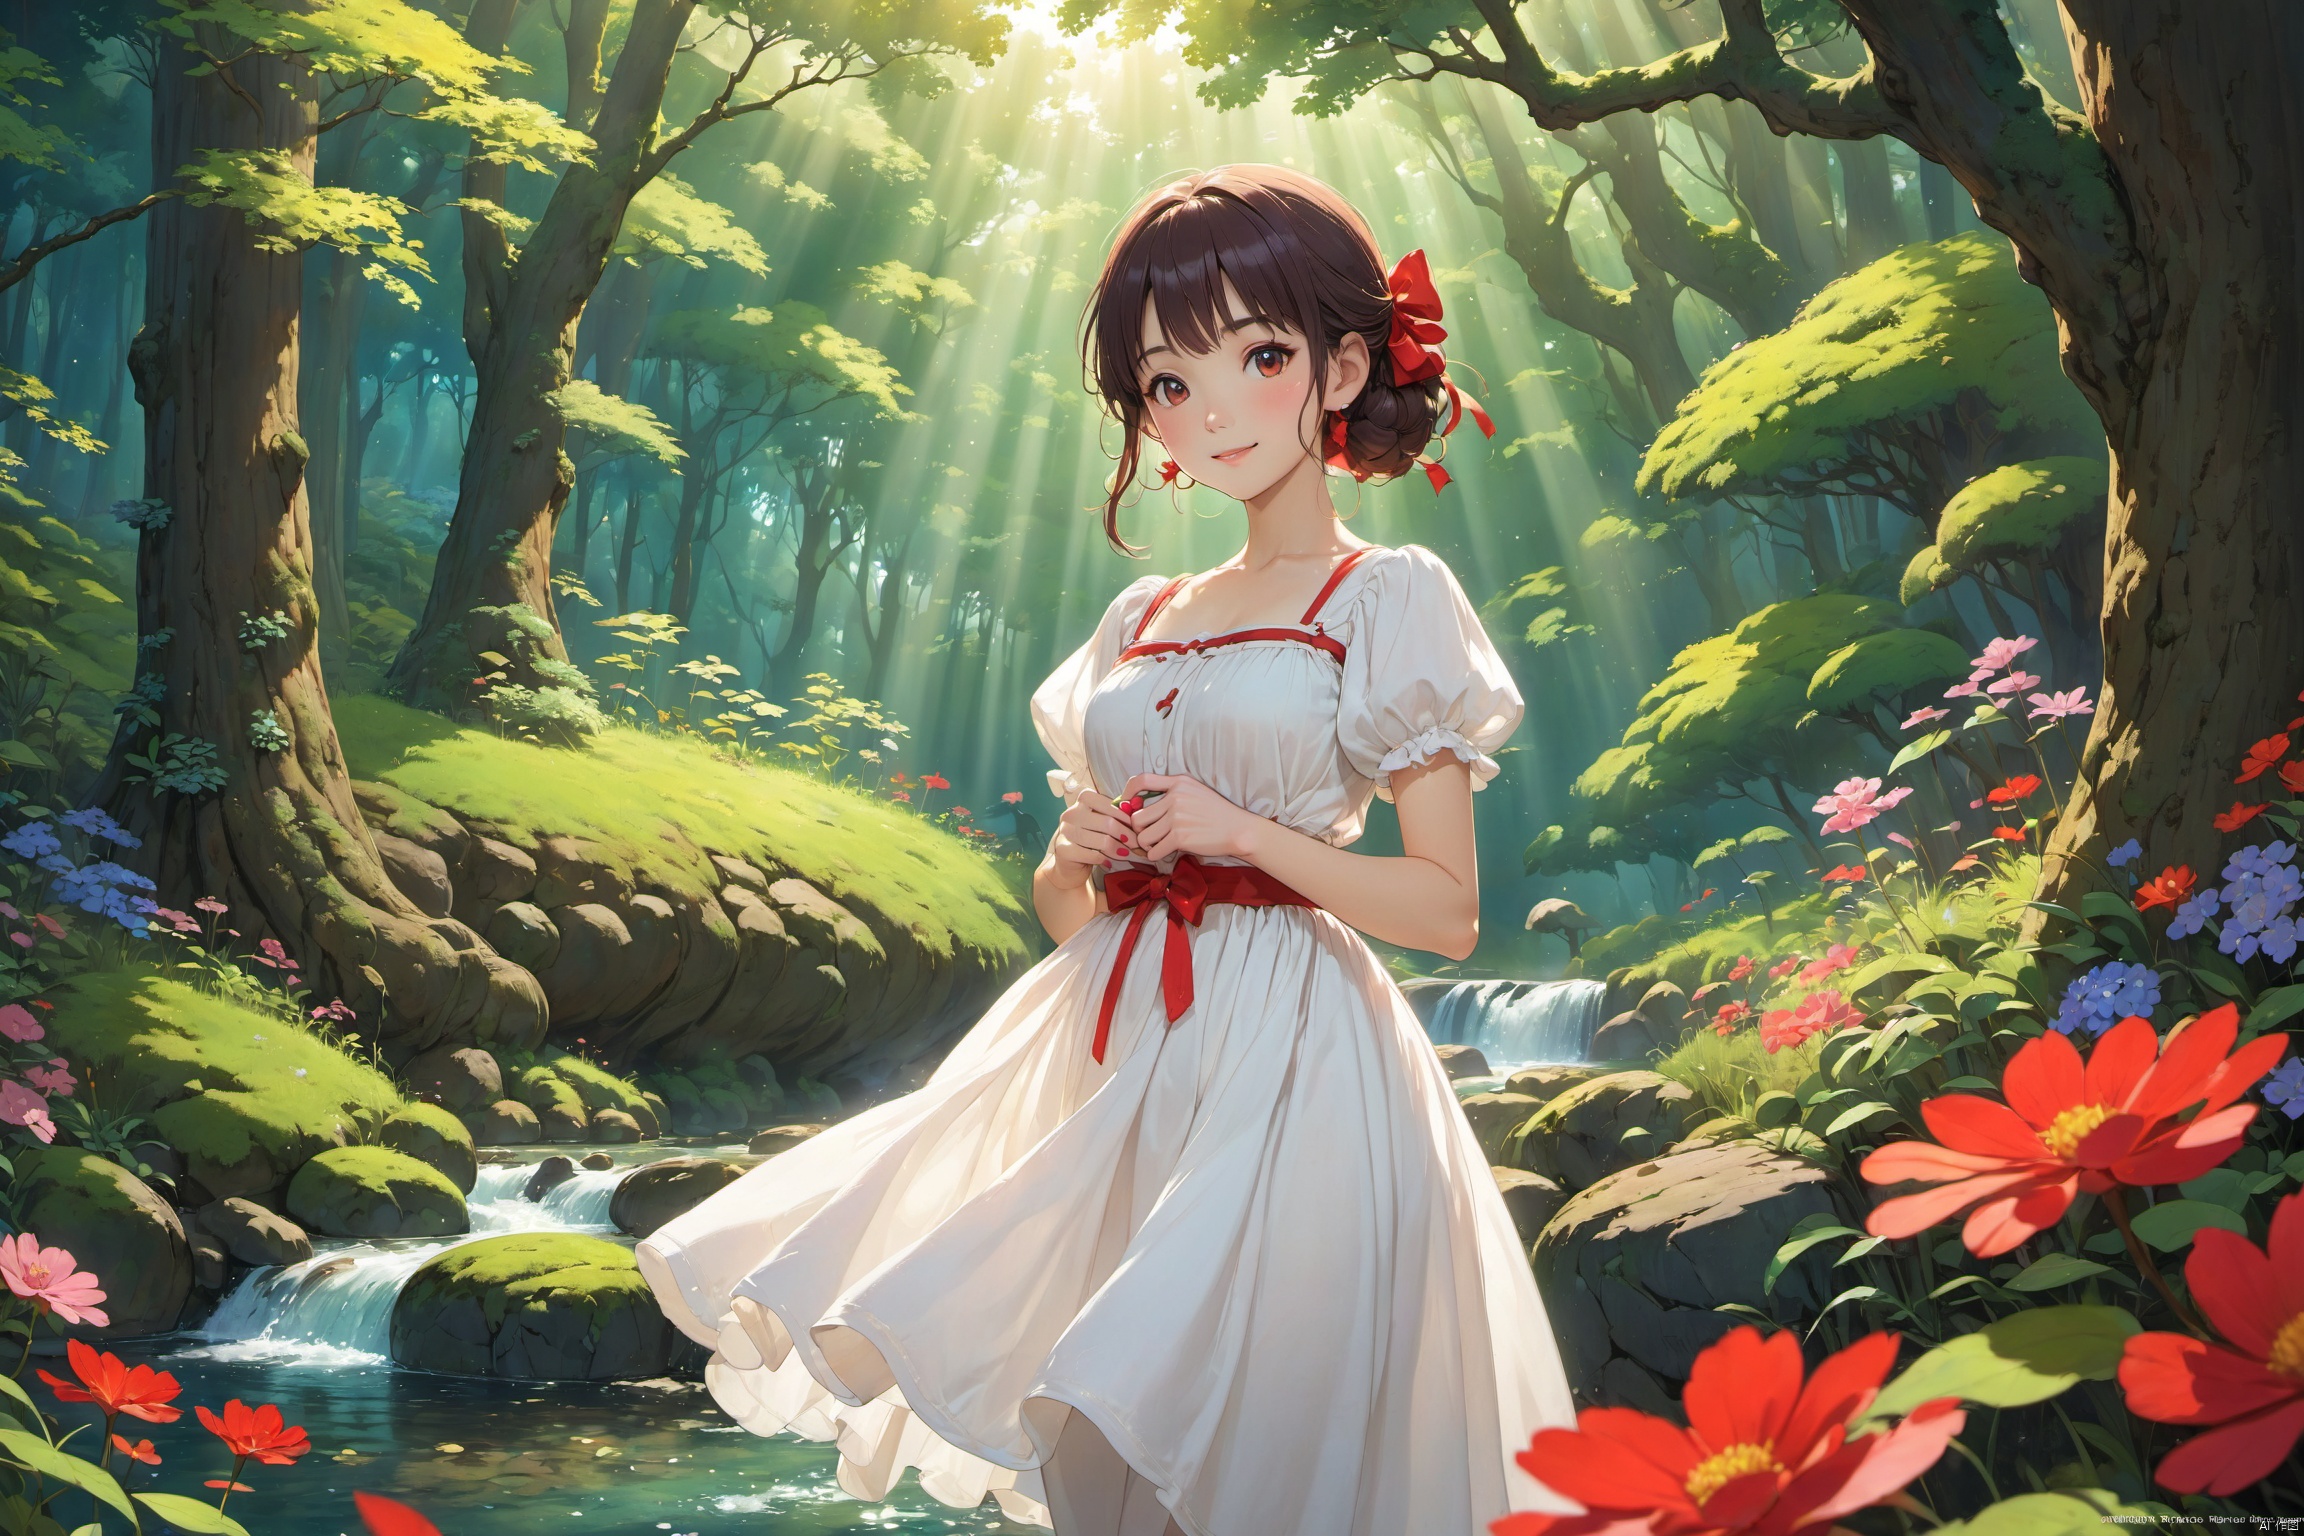 NFSW,A cozy, inviting forest clearing featuring a gentle stream, with sunbeams piercing through the leafy canopy, creating a magical, natural setting that evokes the comfort of a classic Ghibli backdrop
1girl,beautiful face,capable face,looking_at_viewer,smile,perfect figure,(slender waist:1.1),model figure,ghibli,white dress with a red bow hair accessory,
masterpiece,top quality,best quality,official art,beautiful and aesthetic,extremely detailed,
ghibli, (\shui mo\)